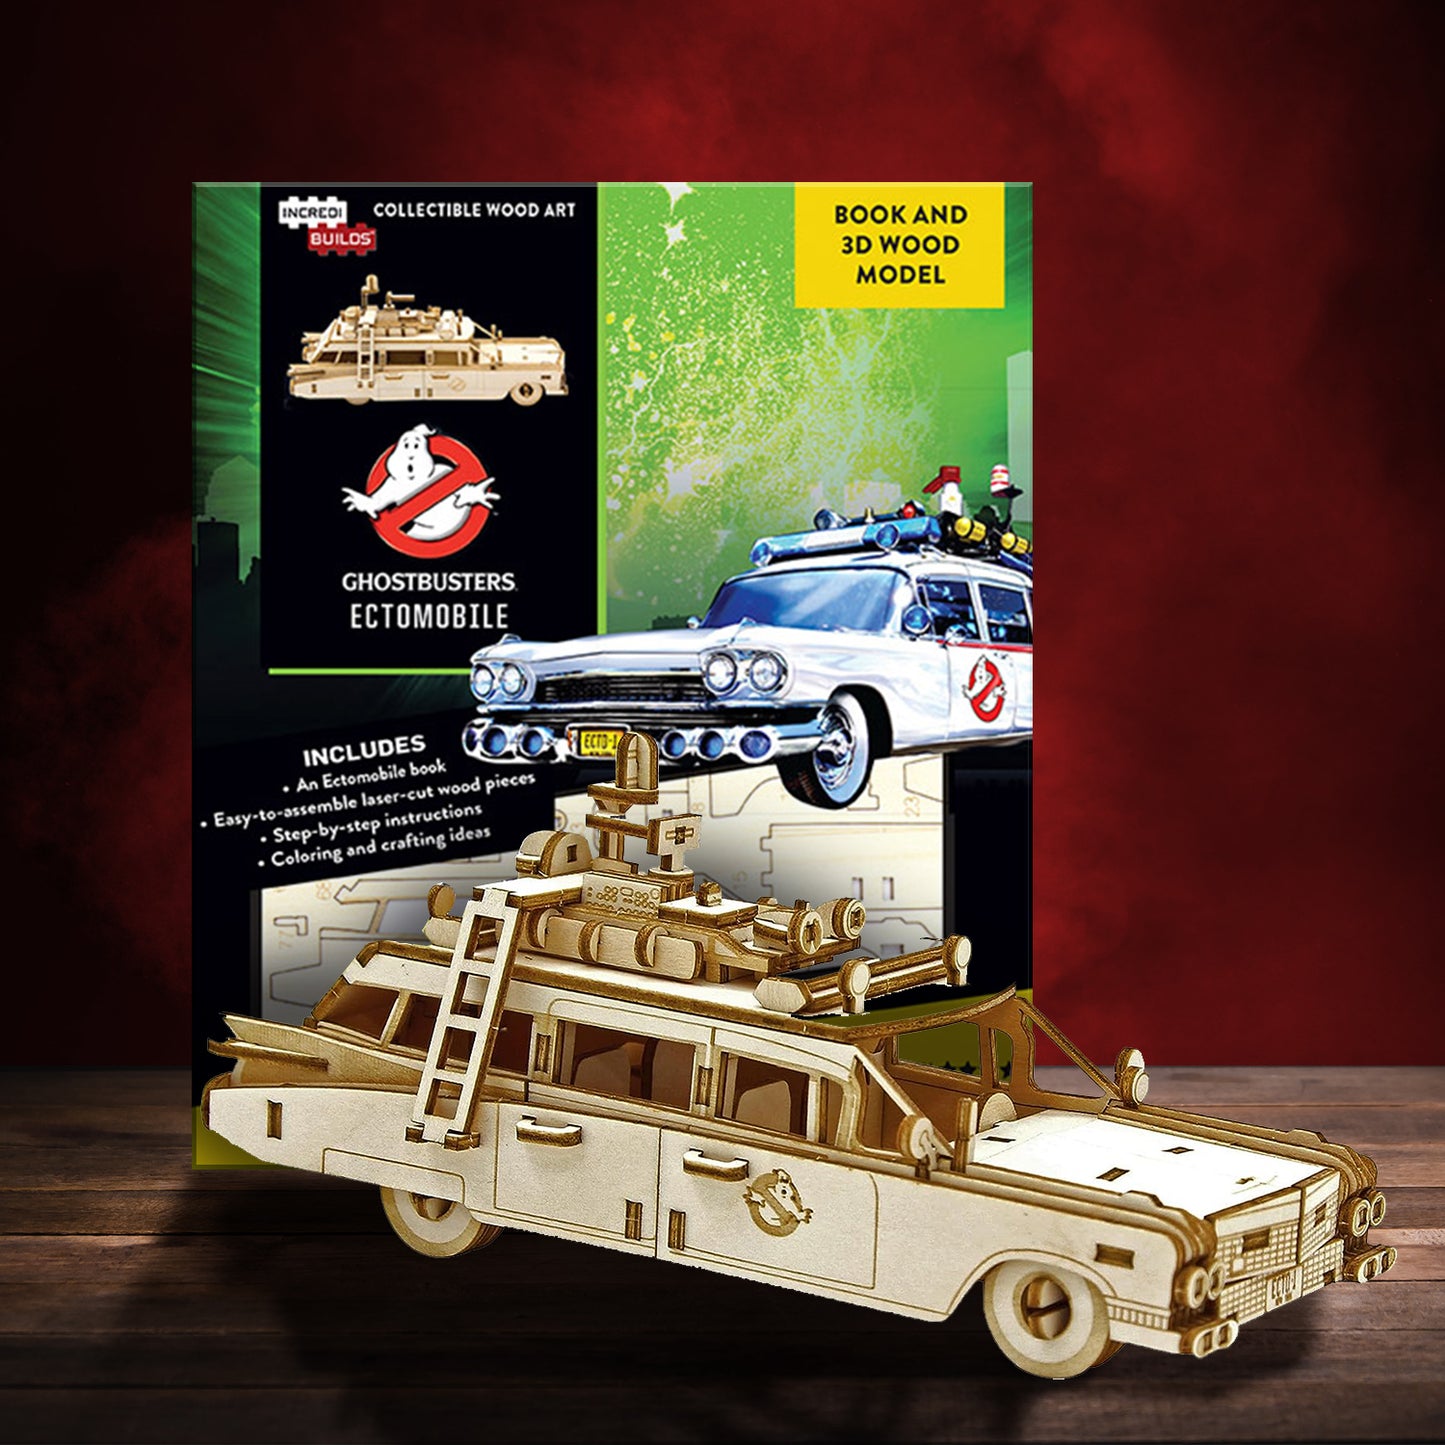 An image of a green box cover on a wooden table against a dark red background, with a drawing of the Ectomobile from the movie Ghostbusters on the right side. A black rectangle at the top shows a picture of the assembled wood model, with the Ghostbusters logo beneath it. At the bottom of the box cover is an image of the wooden model pieces, ready to be assembled.